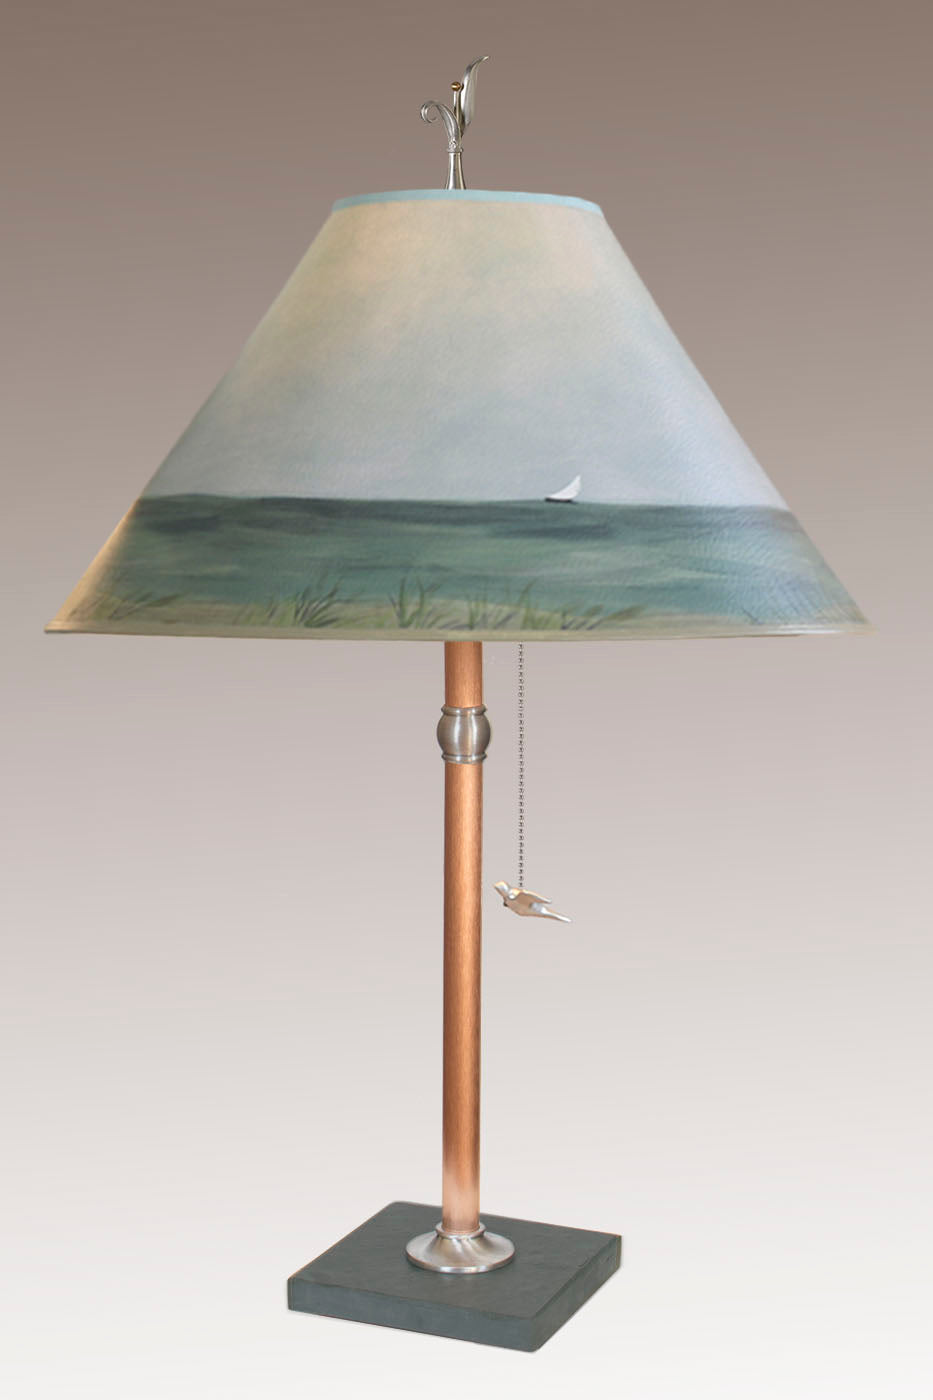 Janna Ugone &amp; Co Table Lamps Copper Table Lamp with Large Conical Shade in Shore